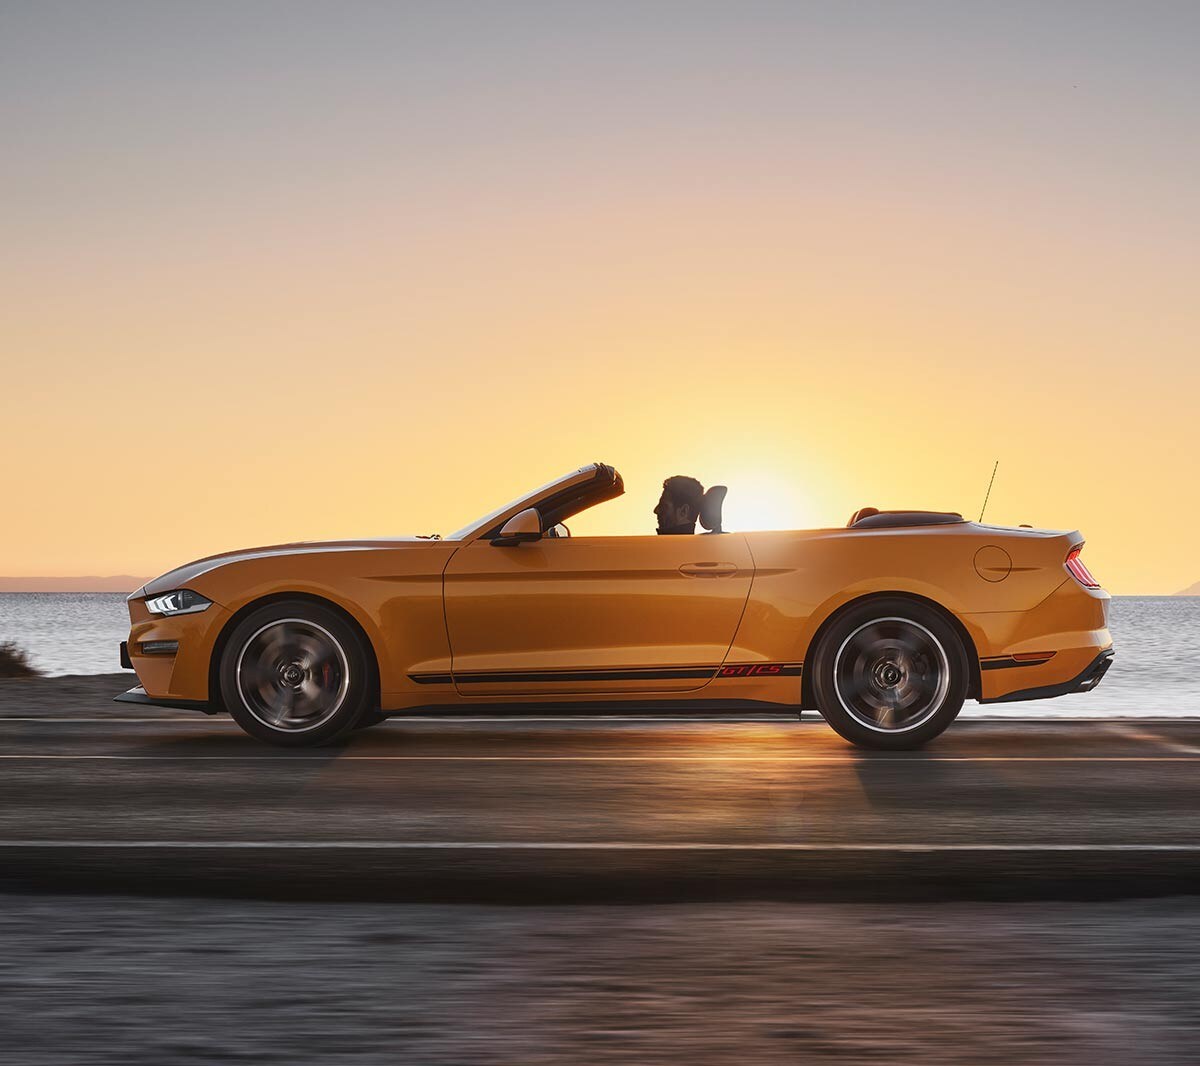 Ford Mustang California Edition driving on a highway against a sunset backdrop